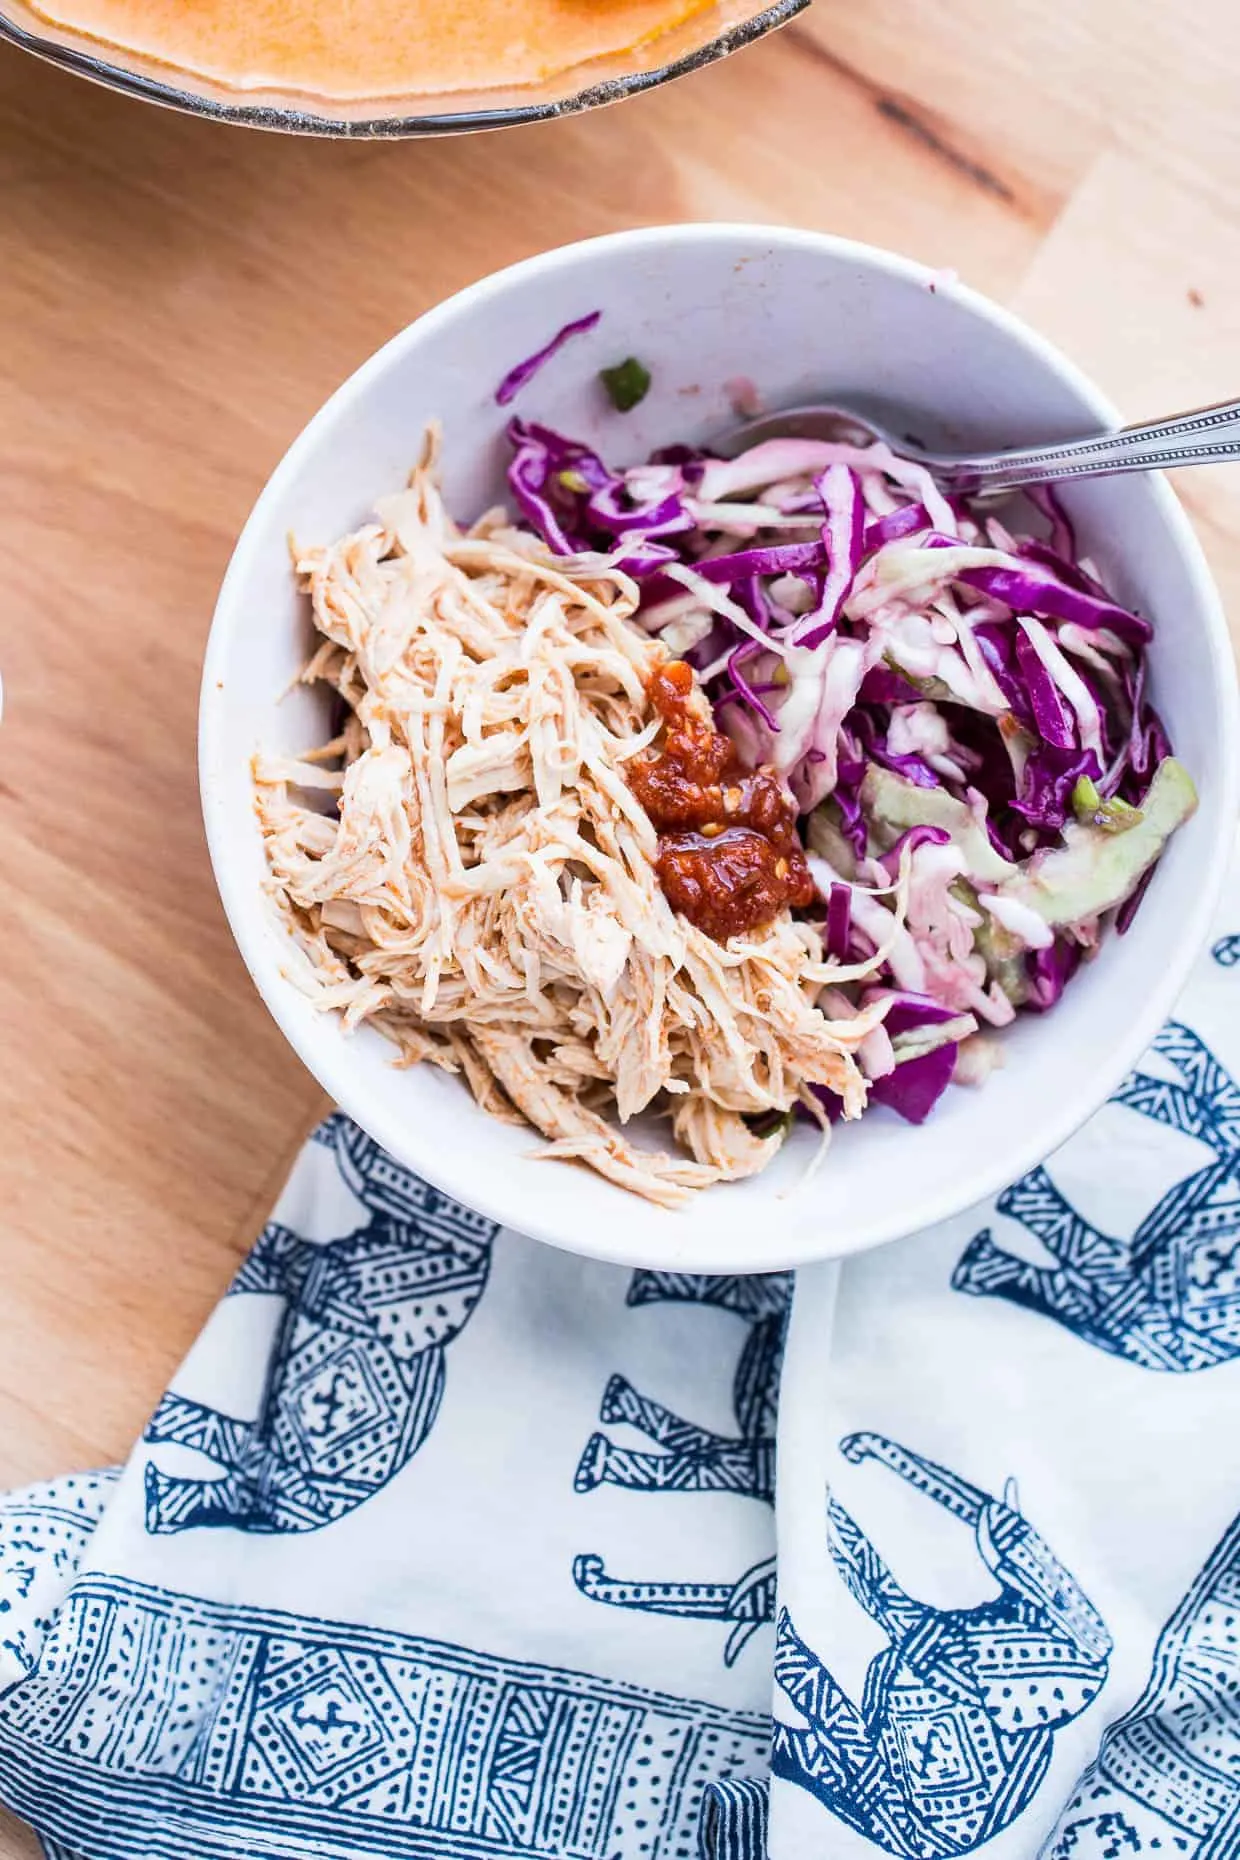 Instant Pot Shredded Red Curry Chicken & Sweet Thai Slaw | Whole30 recipes | paleo recipes | perrysplate.com